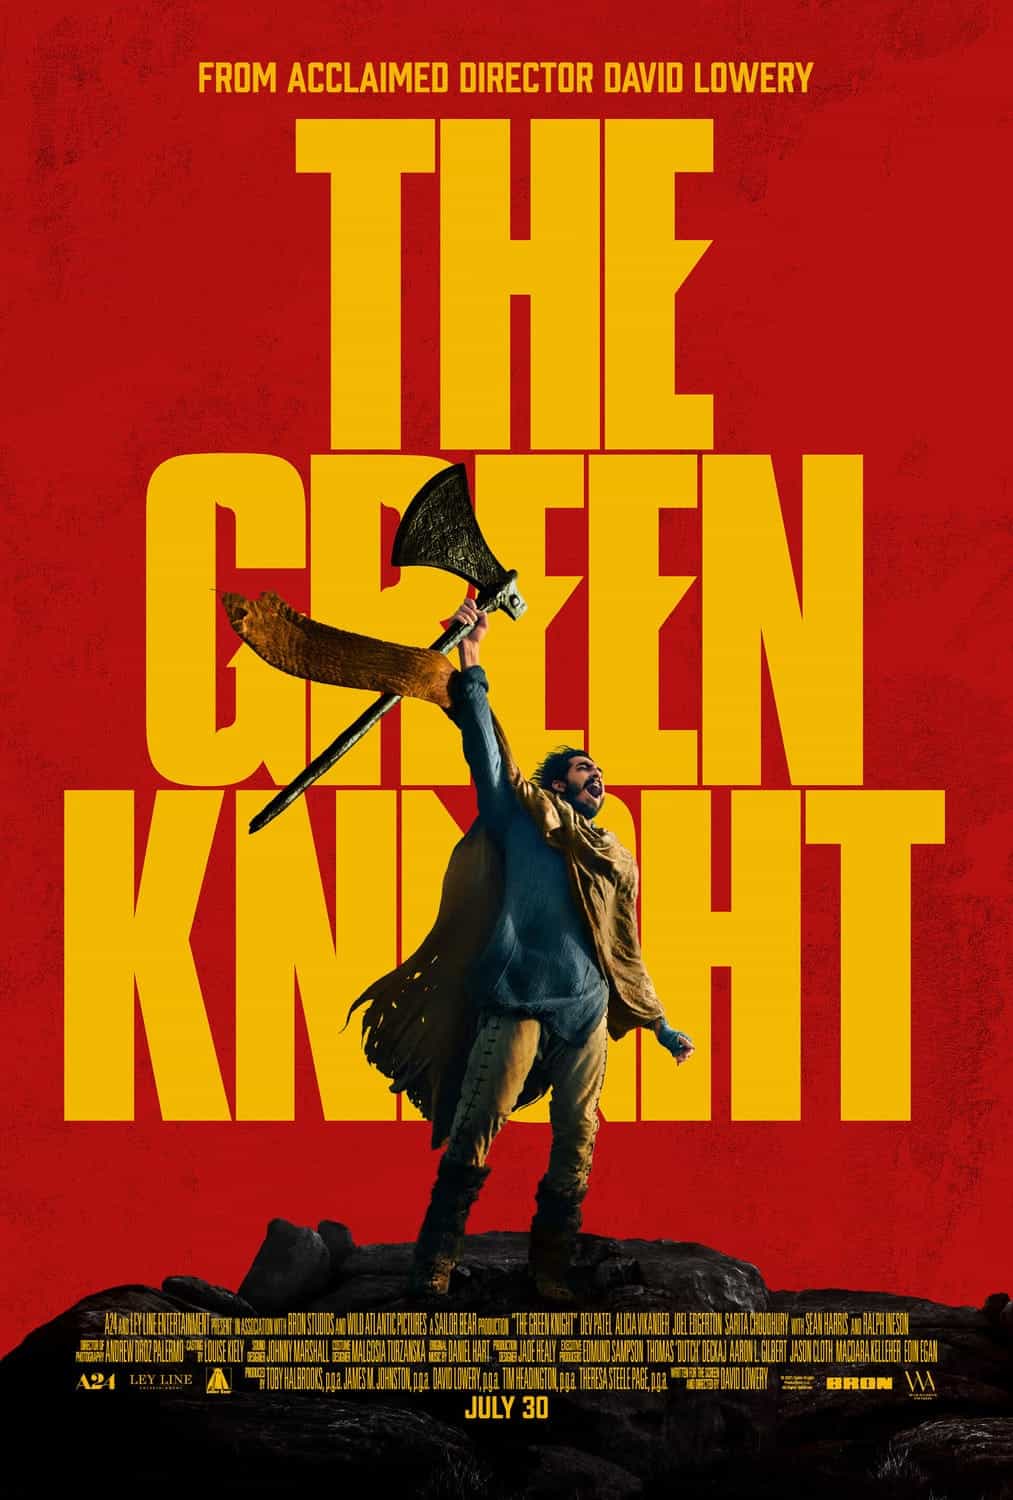 New poster released for The Green Knight starring Dev Patel - movie release date 6th August 2021